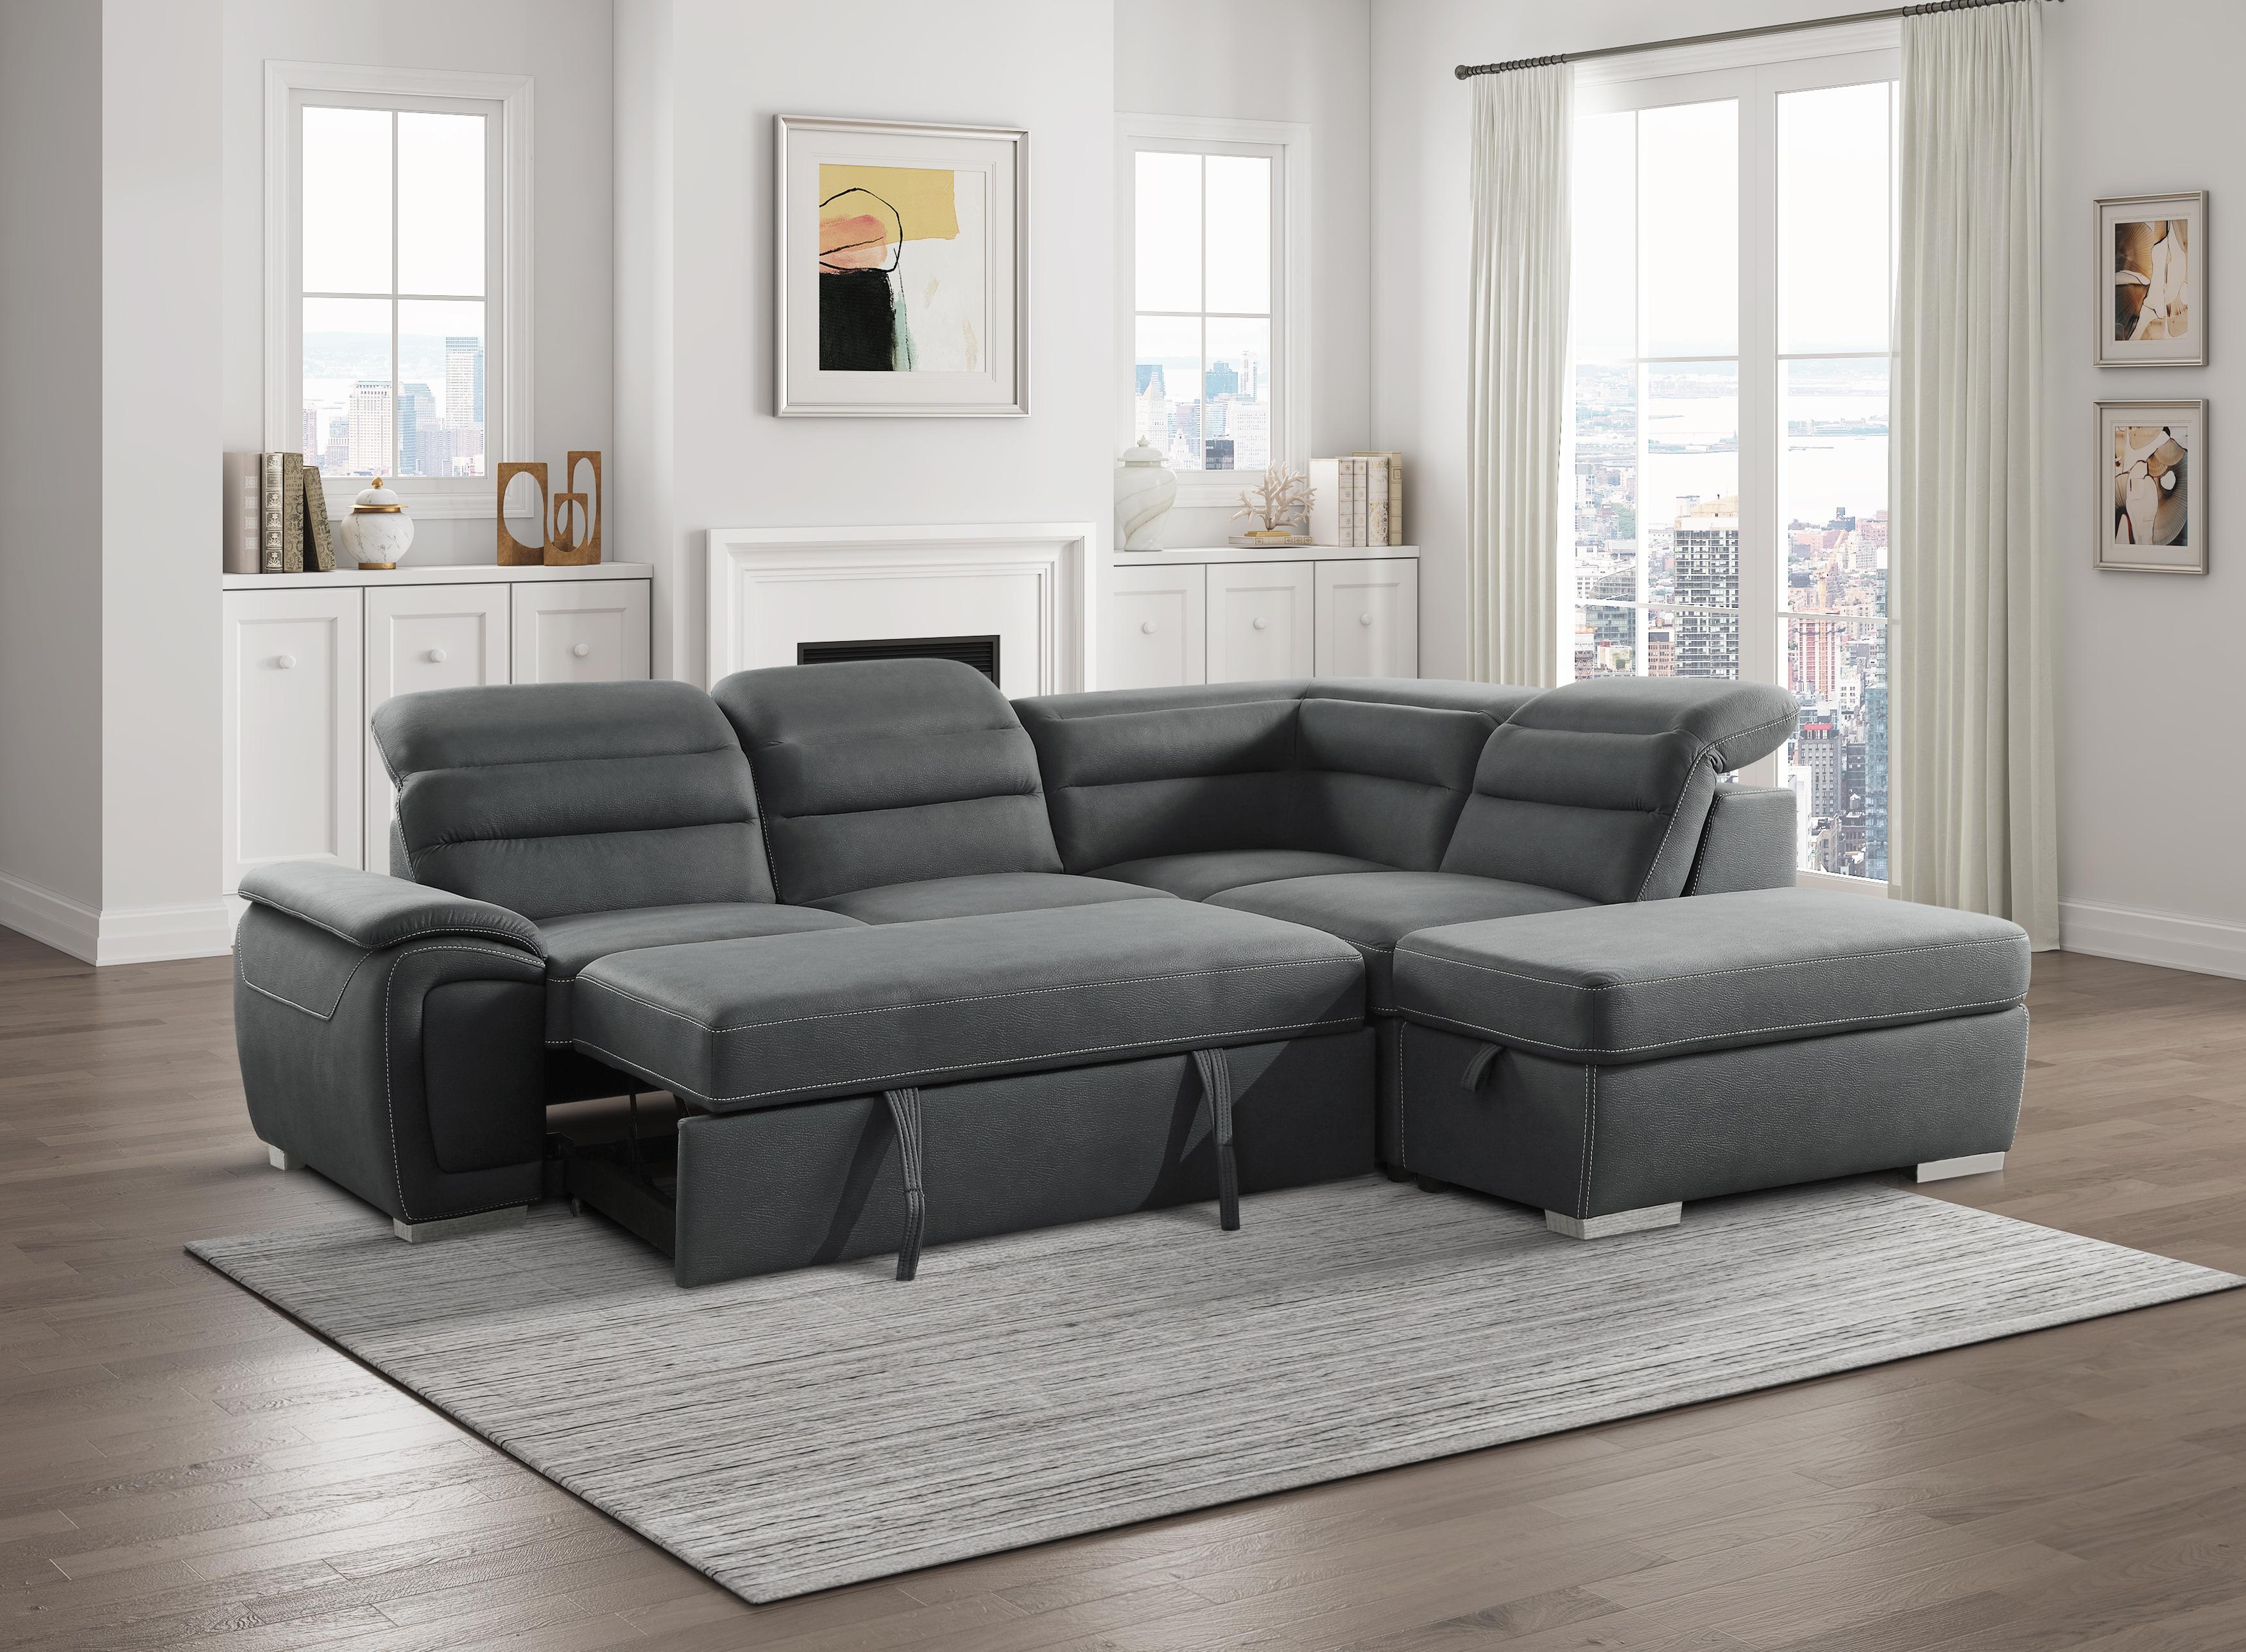 

                    
Buy Contemporary Gray Microfiber RHC 3-Piece Sectional Homelegance 8277NGY* Platina
